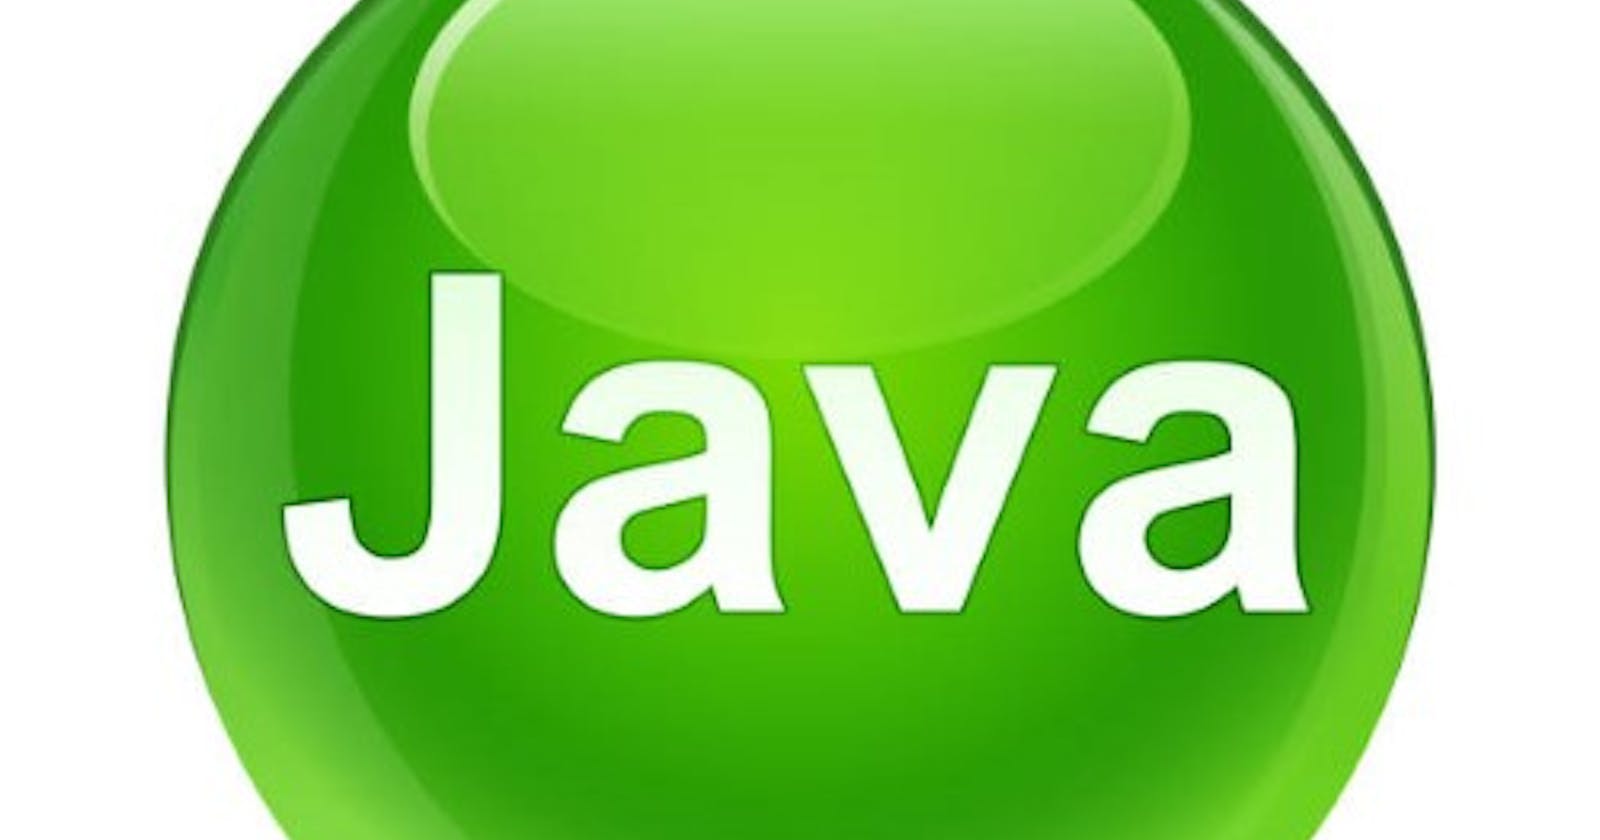 Introduction to Object-Oriented Programming in Java